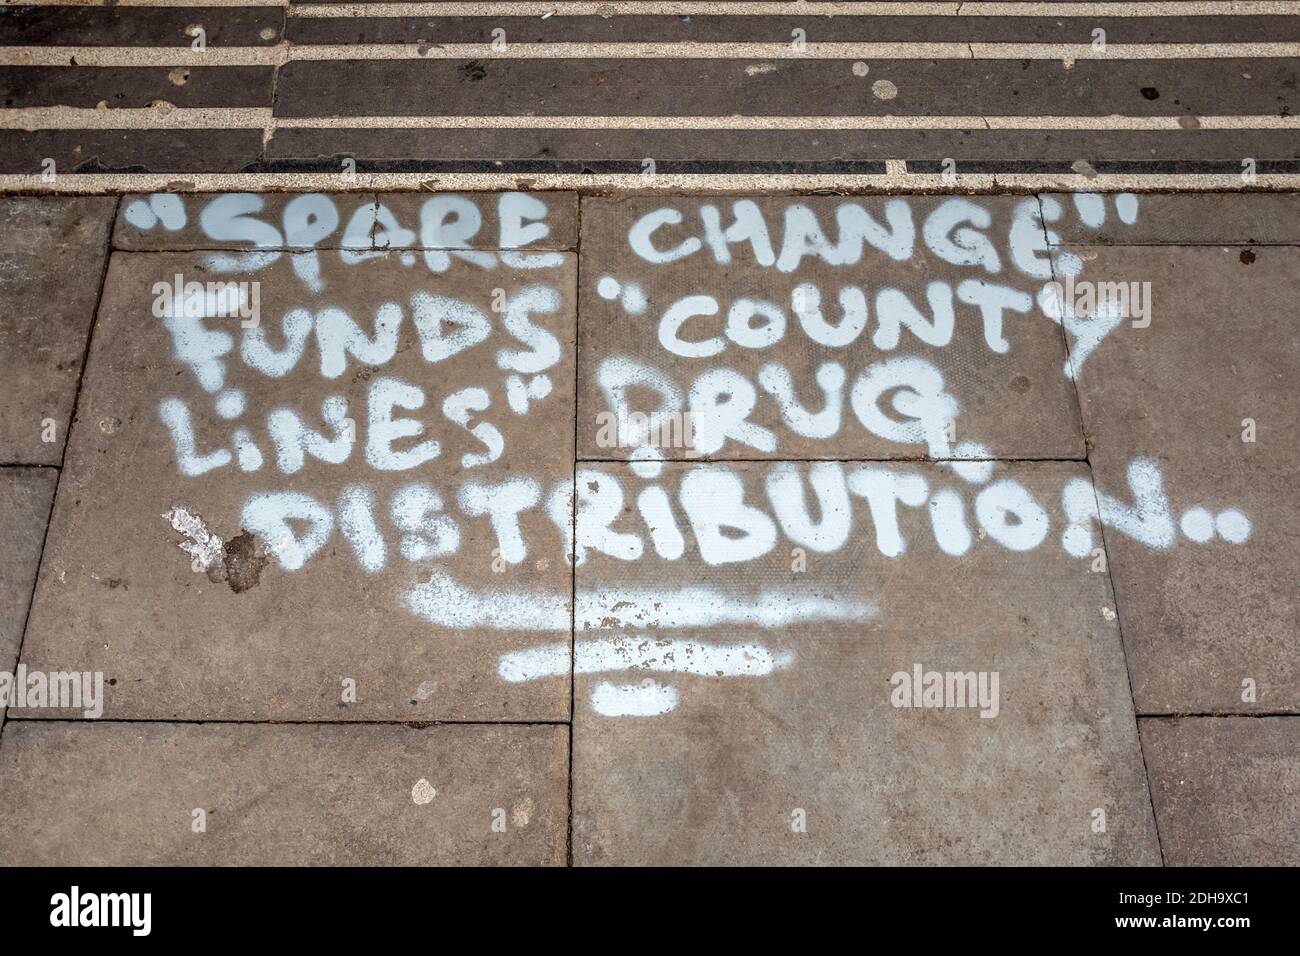 Brighton, December 10th 2020: 'Spare change' funds 'county lines' drug distribution Stock Photo